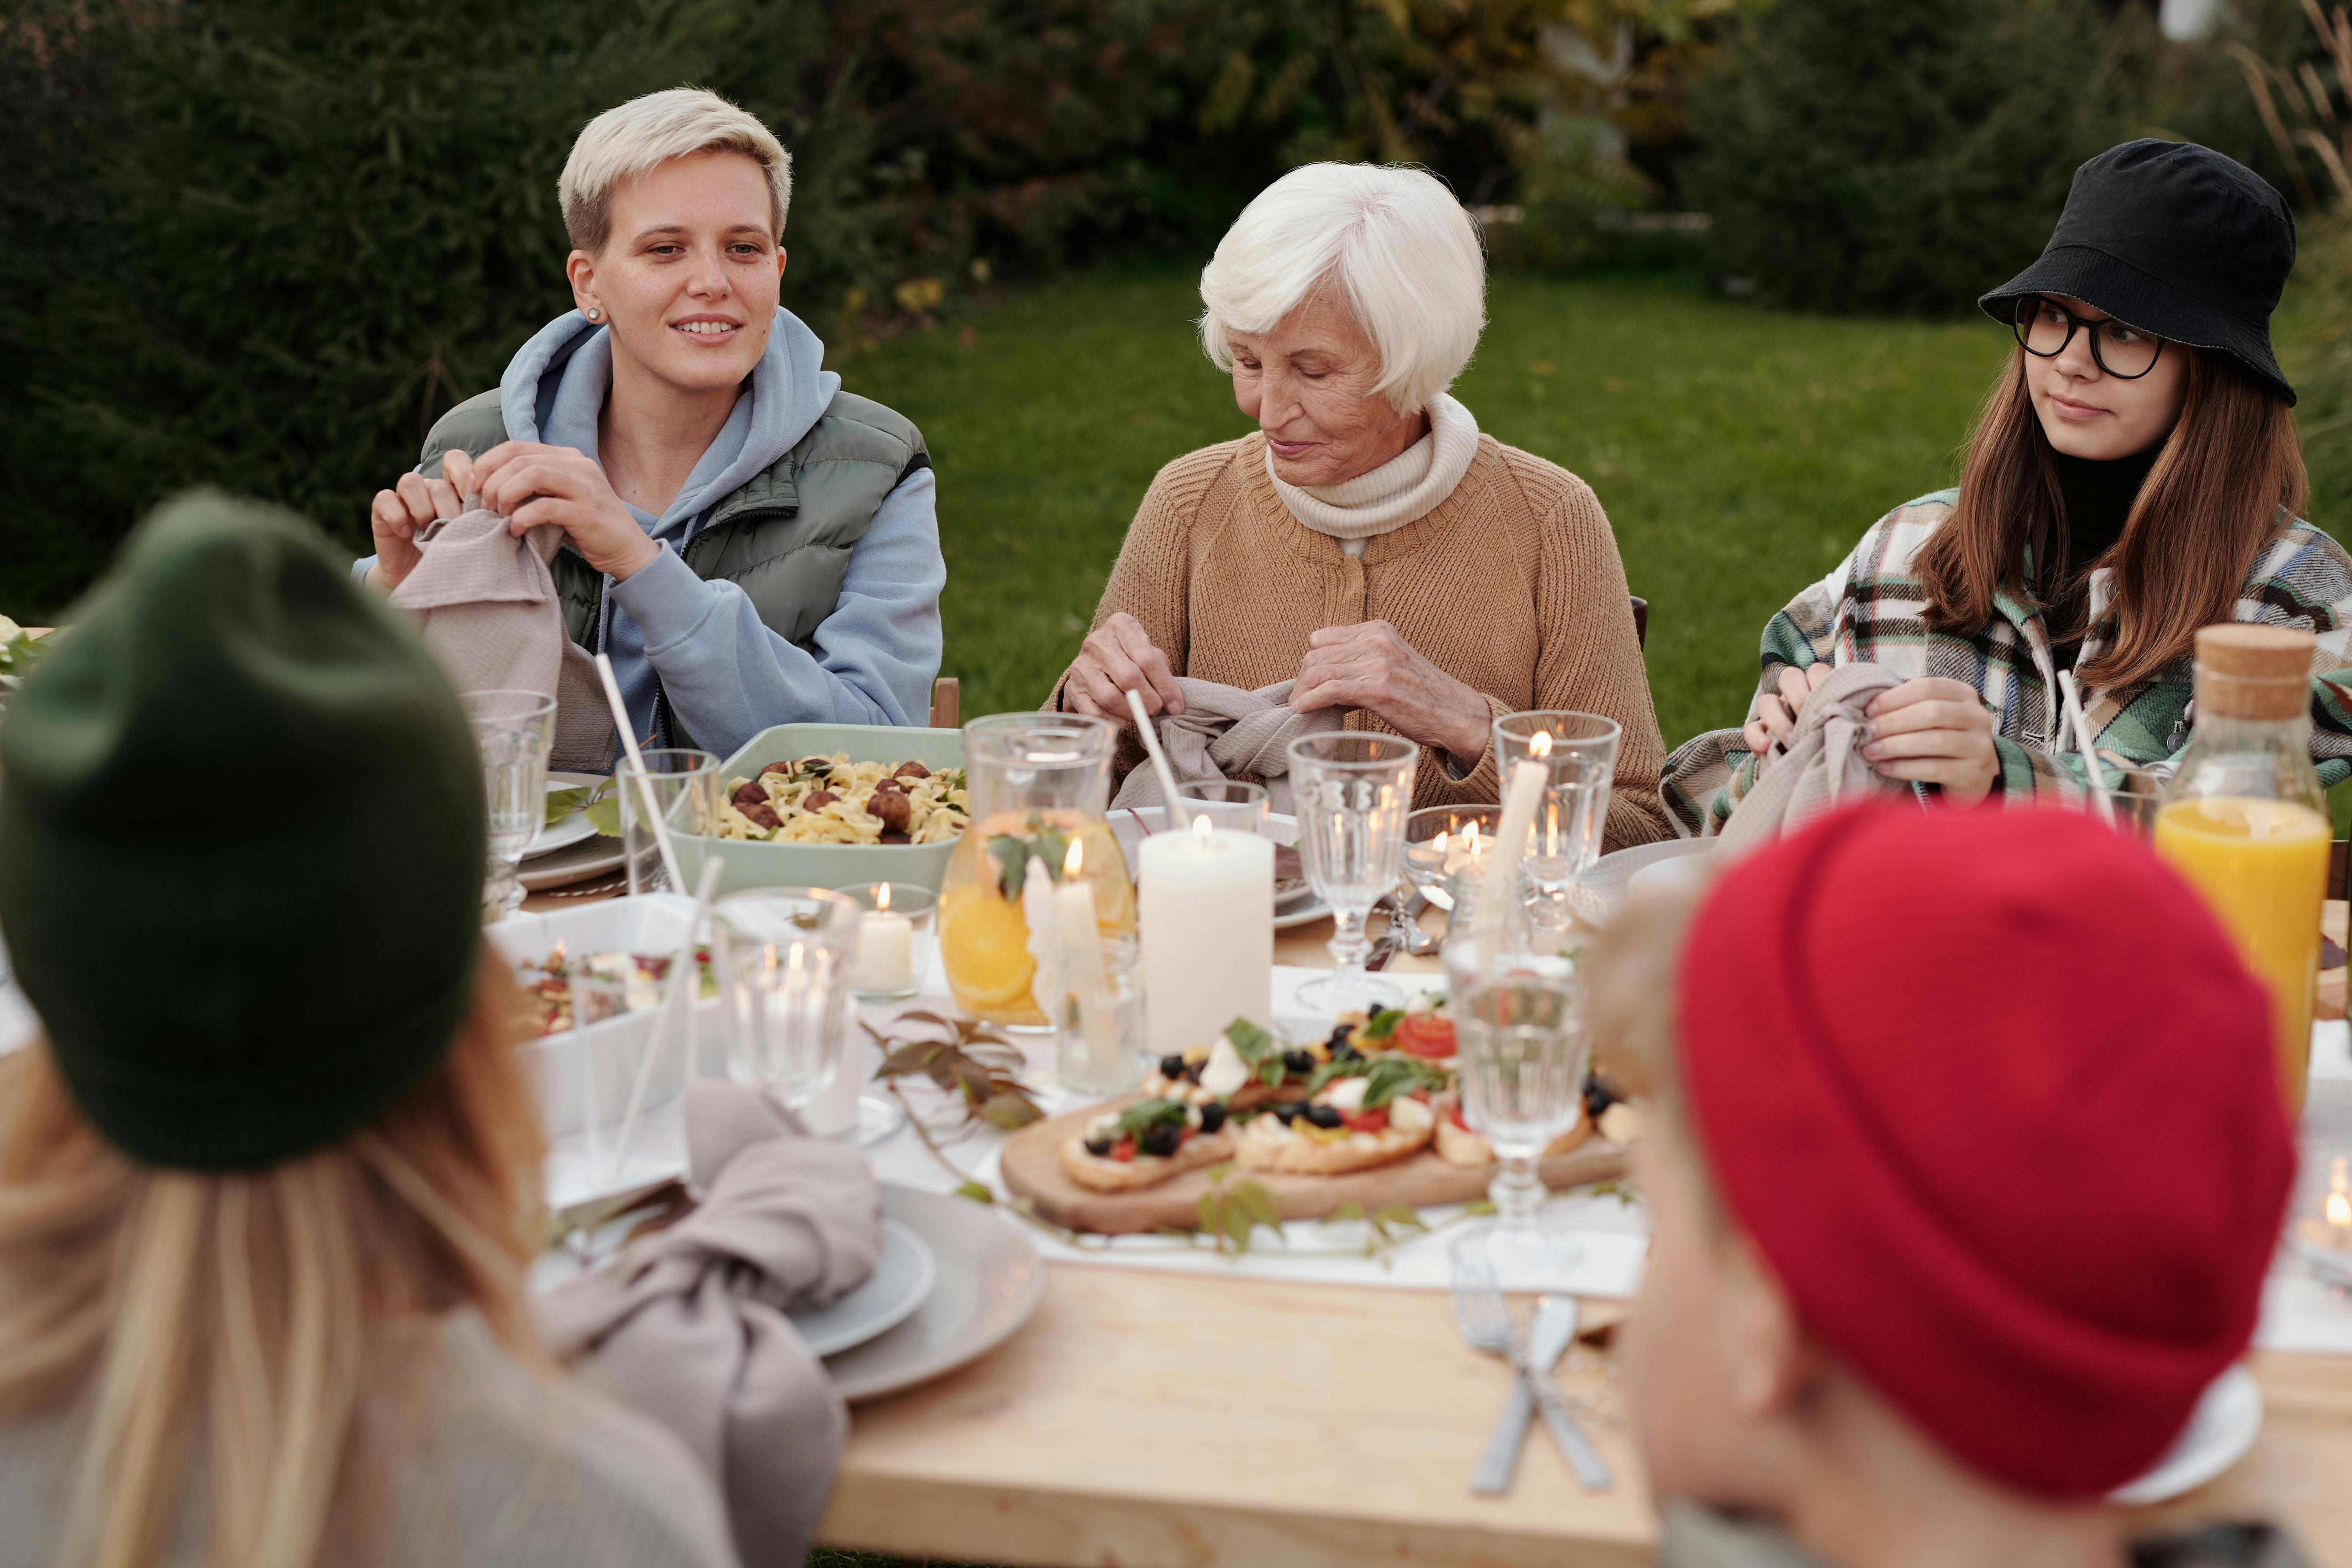 Family members gathered for a meal | Source: Pexels